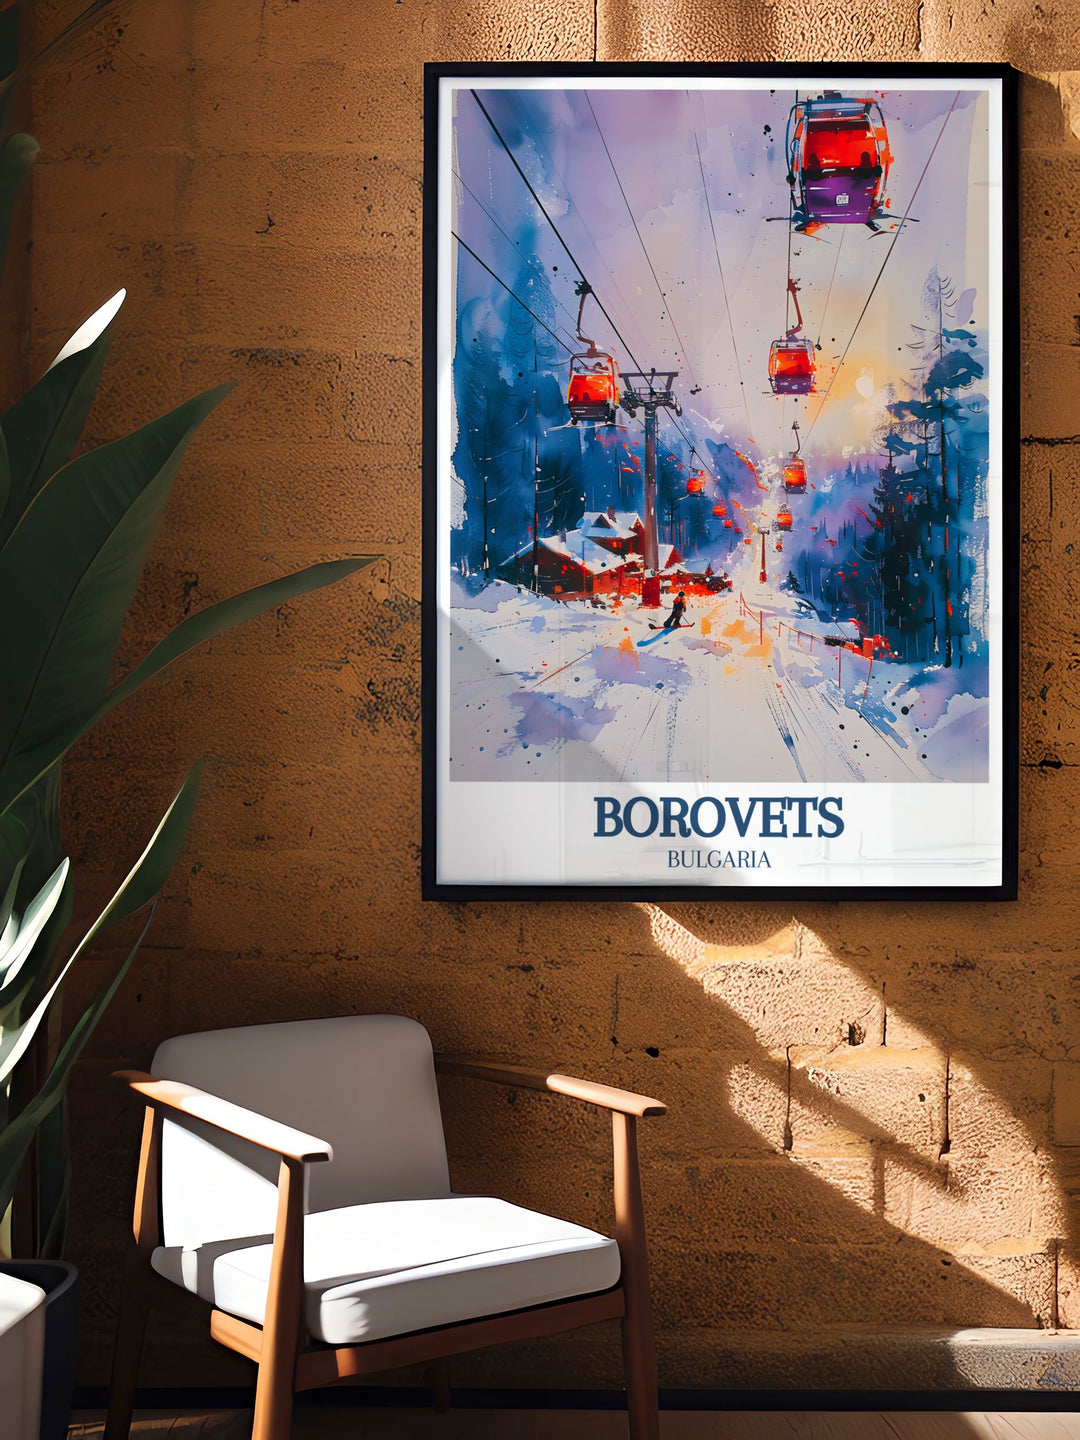 High quality print of Borovets modern ski amenities and the exciting descent of the Yastrebets slope, capturing the essence of Bulgarias premier alpine destination. Ideal for art lovers who appreciate both adventure and nature.